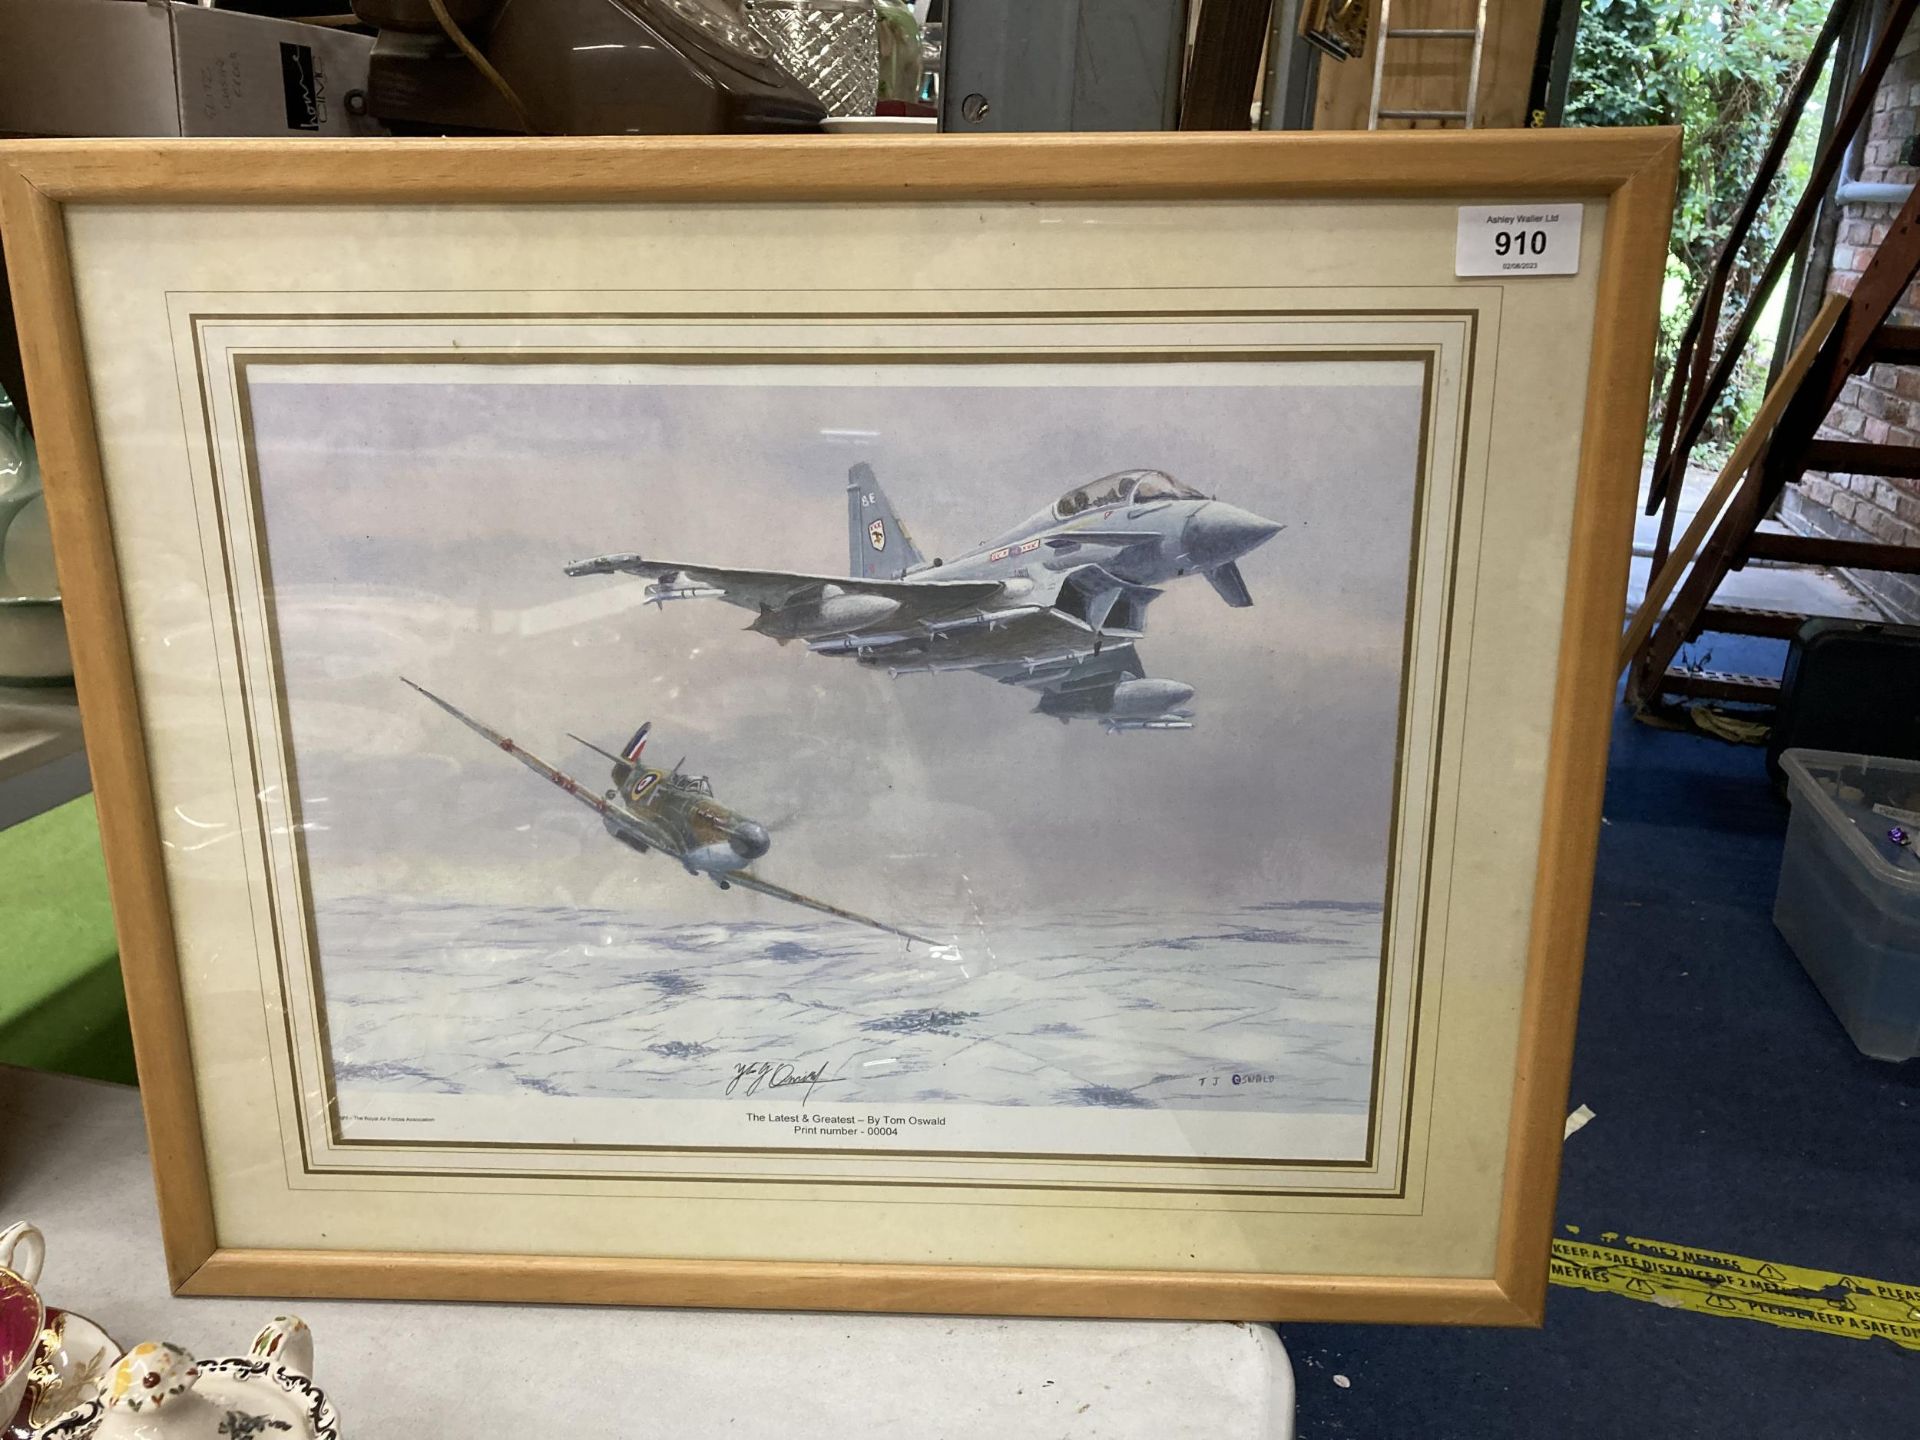 A FRAMED PENCIL SIGNED LIMITED EDITION PRINT OF A SPITFIRE - TITLED 'THE LATEST AND GREATEST' BY TOM